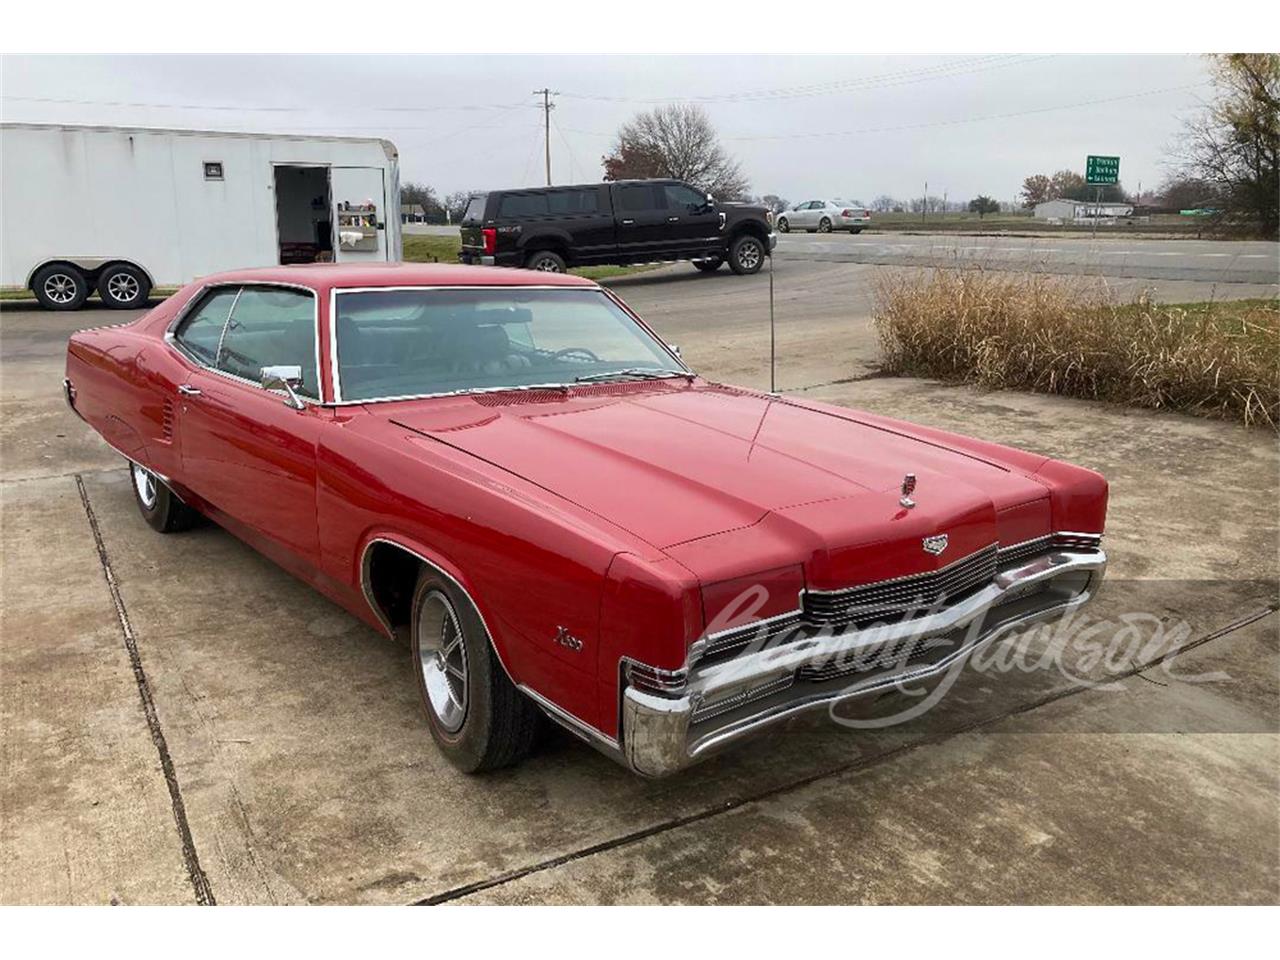 For Sale at Auction: 1969 Mercury Marauder in Scottsdale, Arizona for sale in Scottsdale, AZ